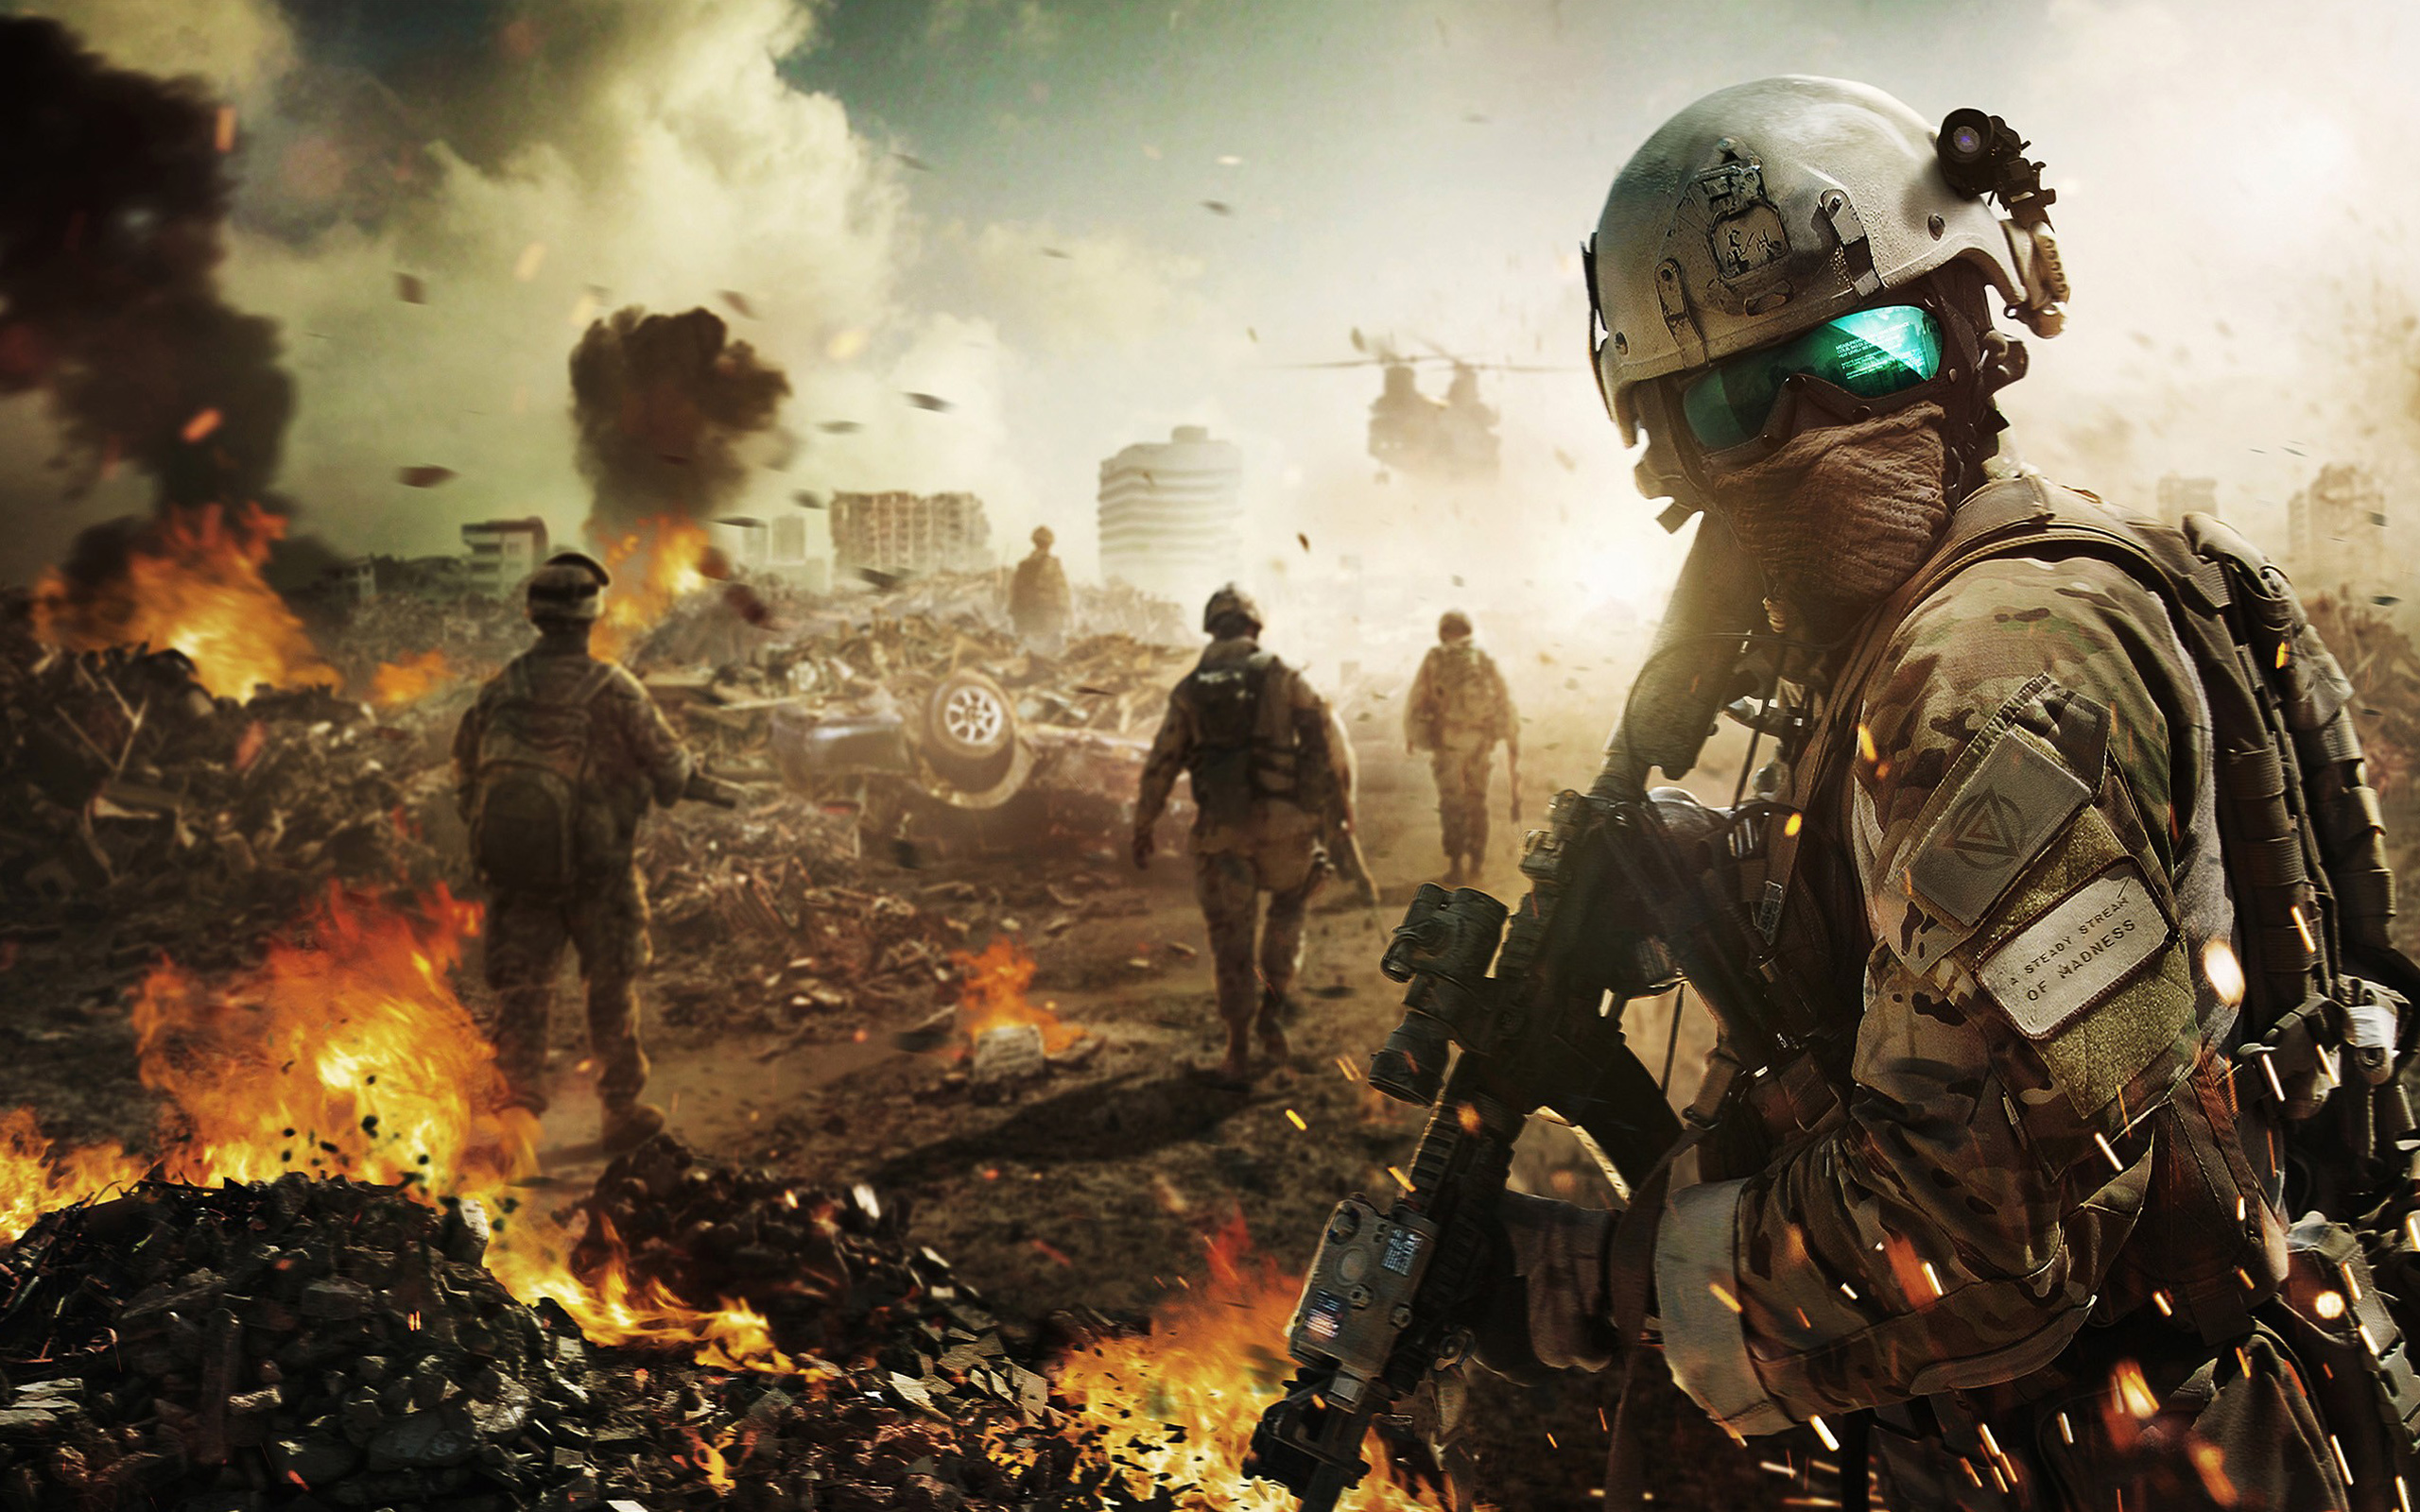 ghost, Recon, Graw, Soldiers, Fire, Military, Apocalyptic, Warrior, Sci fi Wallpaper HD / Desktop and Mobile Background